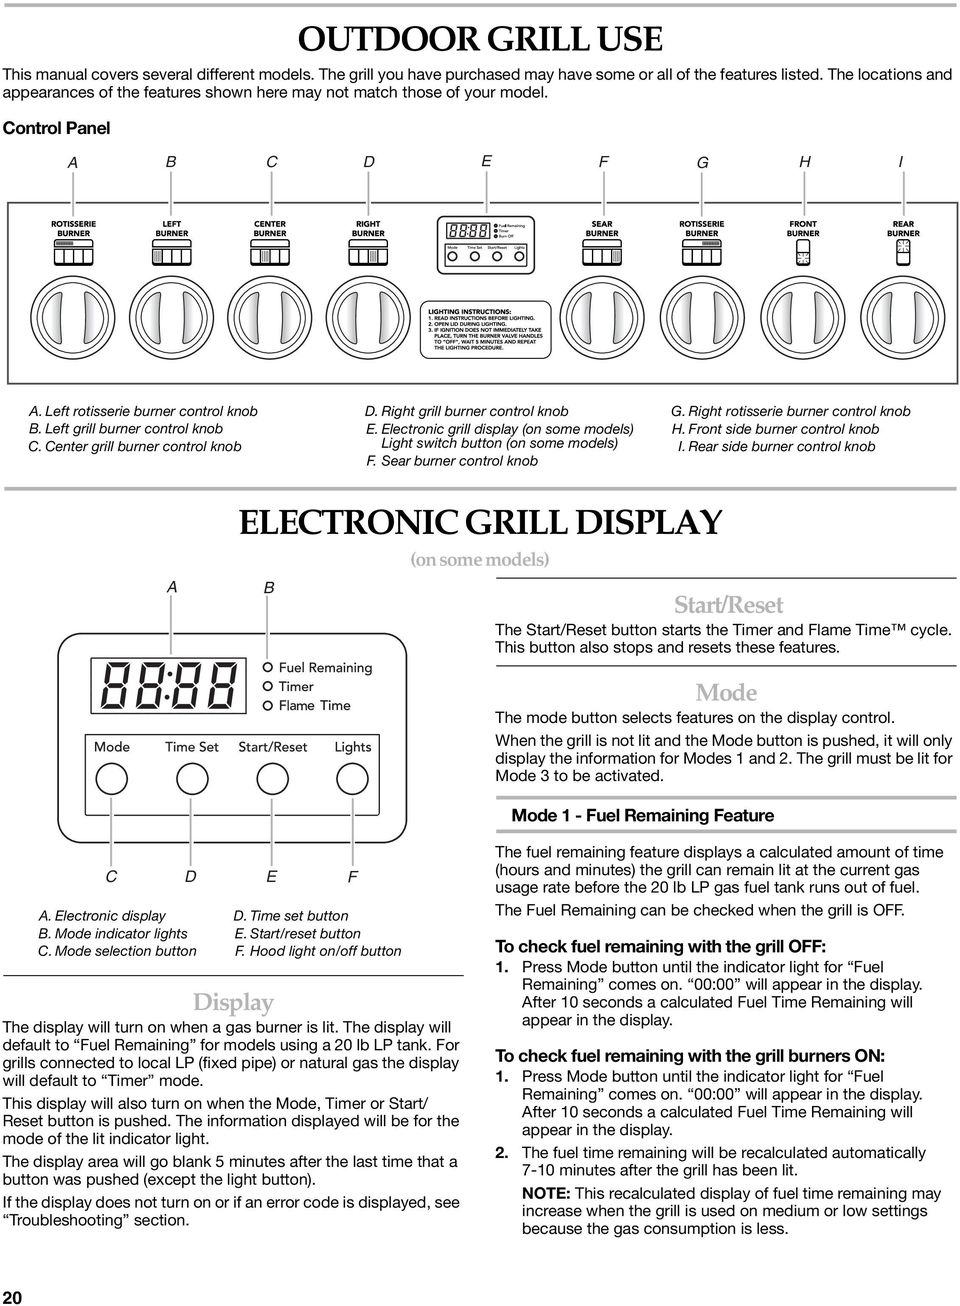 Center grill burner control knob D. Right grill burner control knob E. Electronic grill display (on some models) Light switch button (on some models) F. Sear burner control knob G.